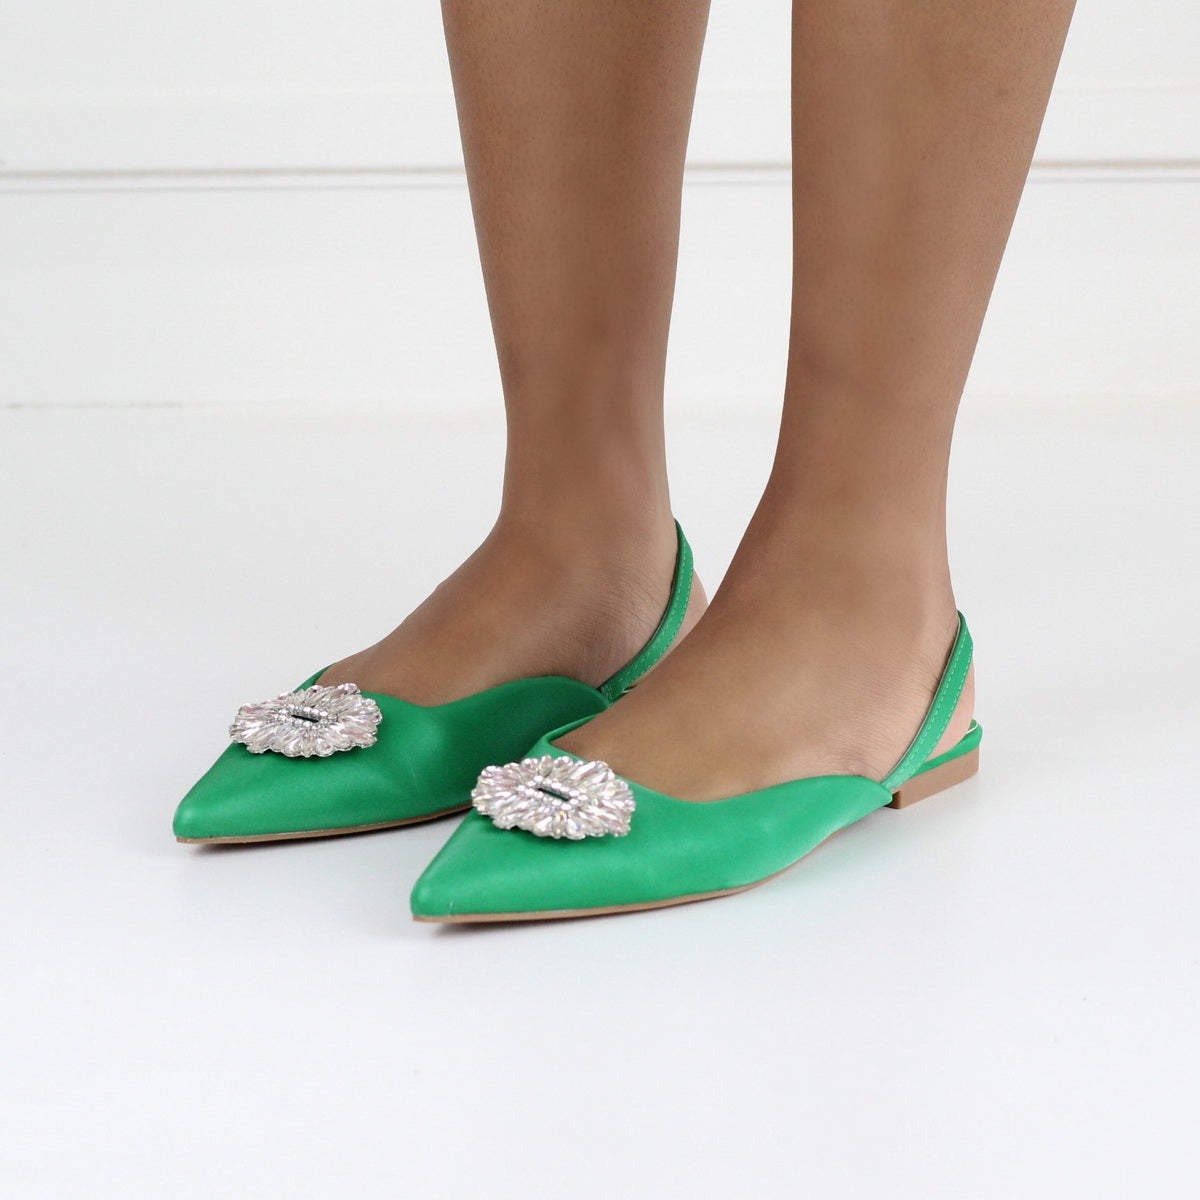 Erina pointy sling back pump with a trim green